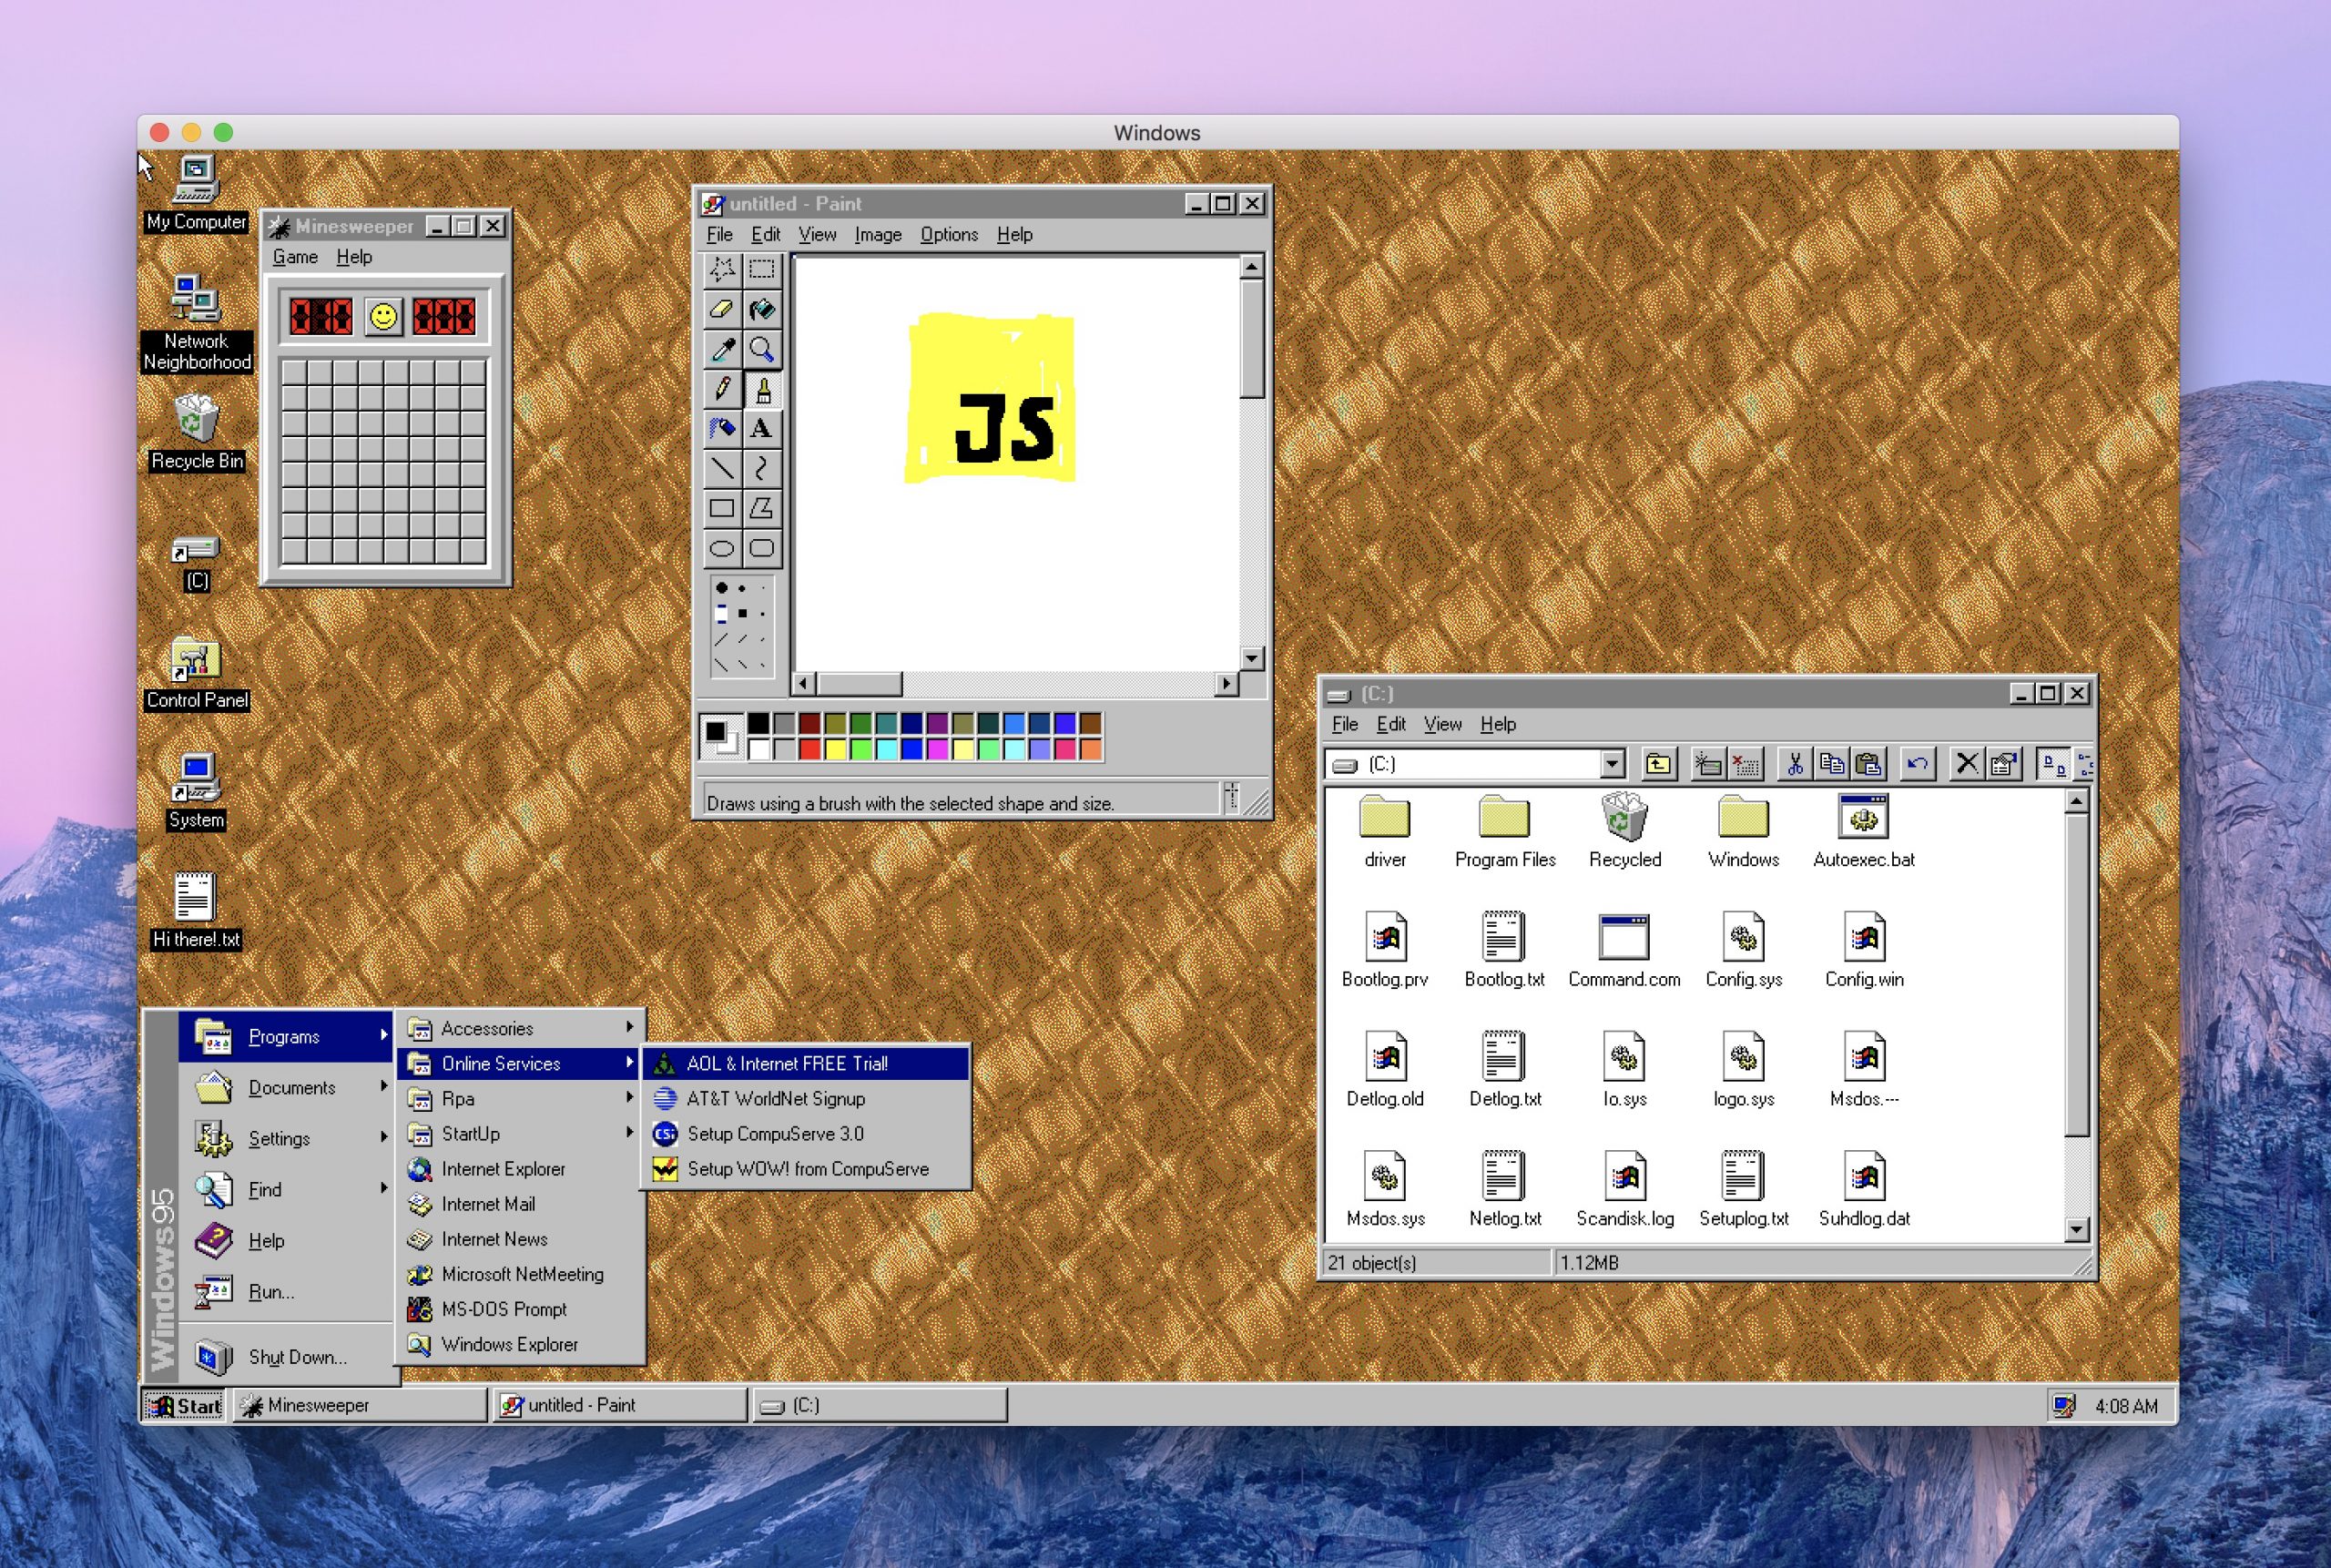 Run Windows 95 as an app on Win, MaOS and Linux